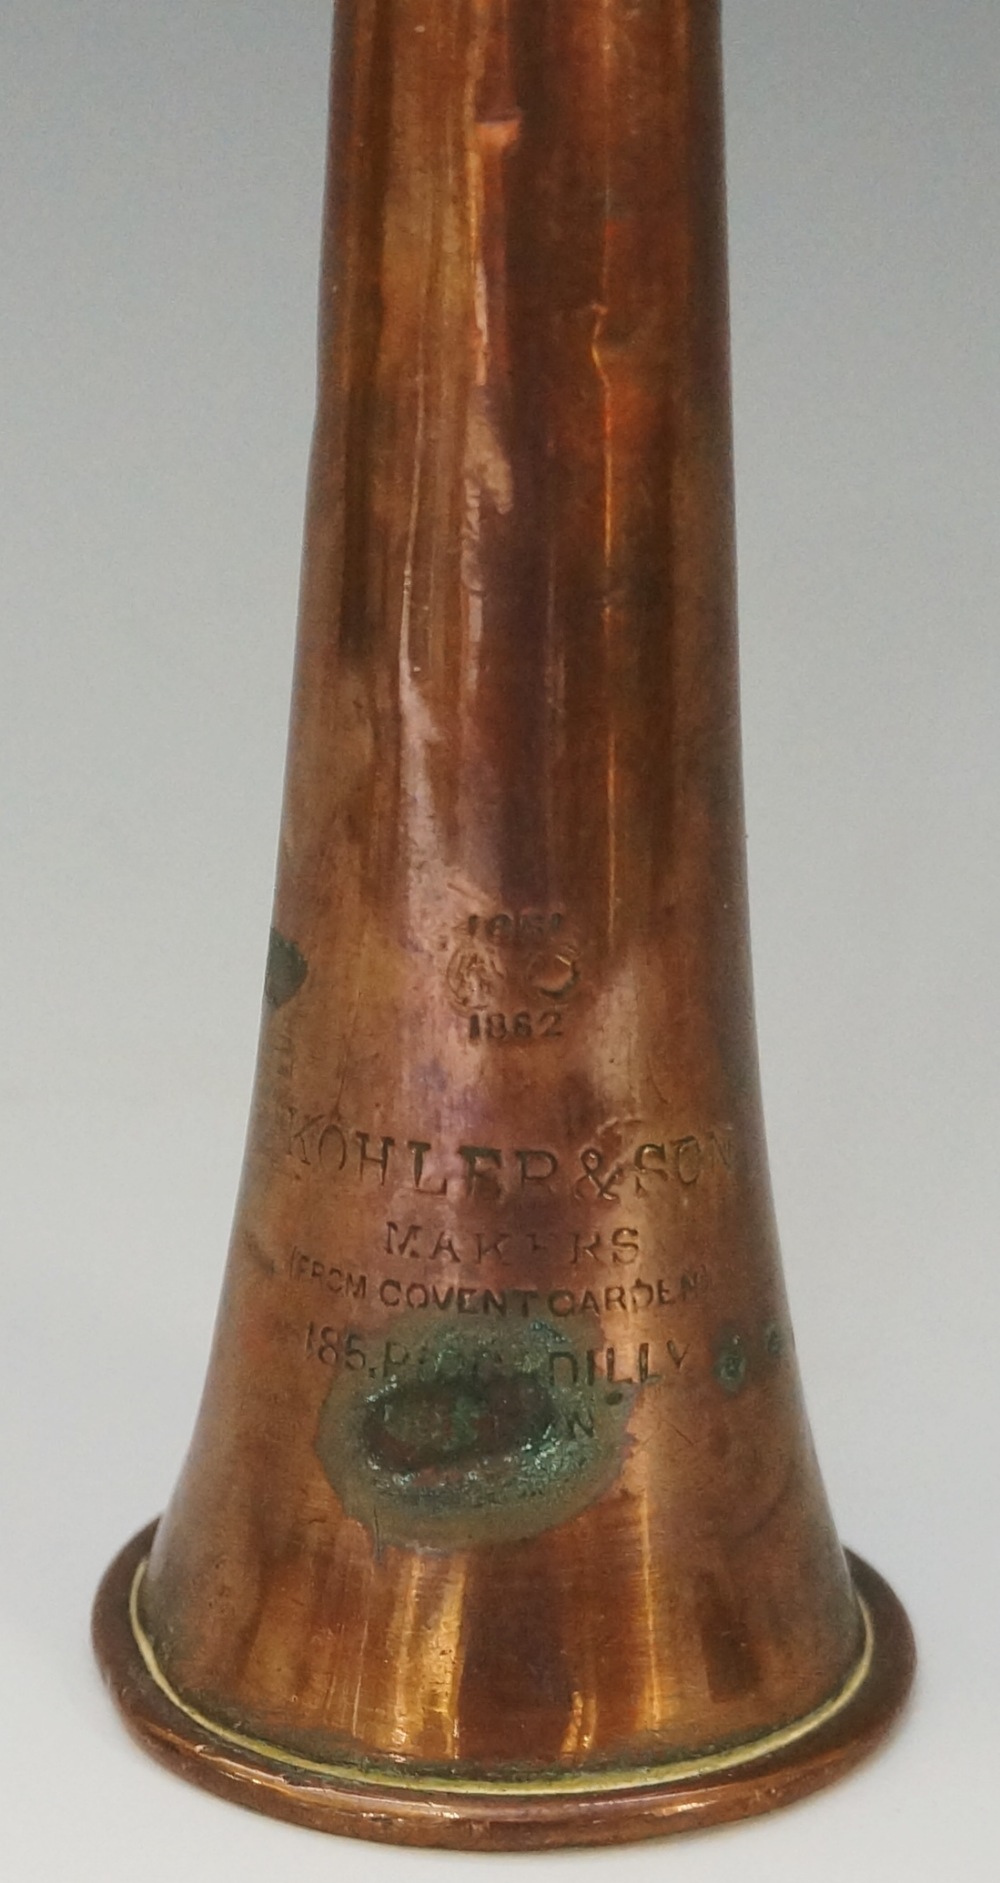 A rare Kohler & Son copper and silver plate horn inscribed 1851-1862, - Image 2 of 2